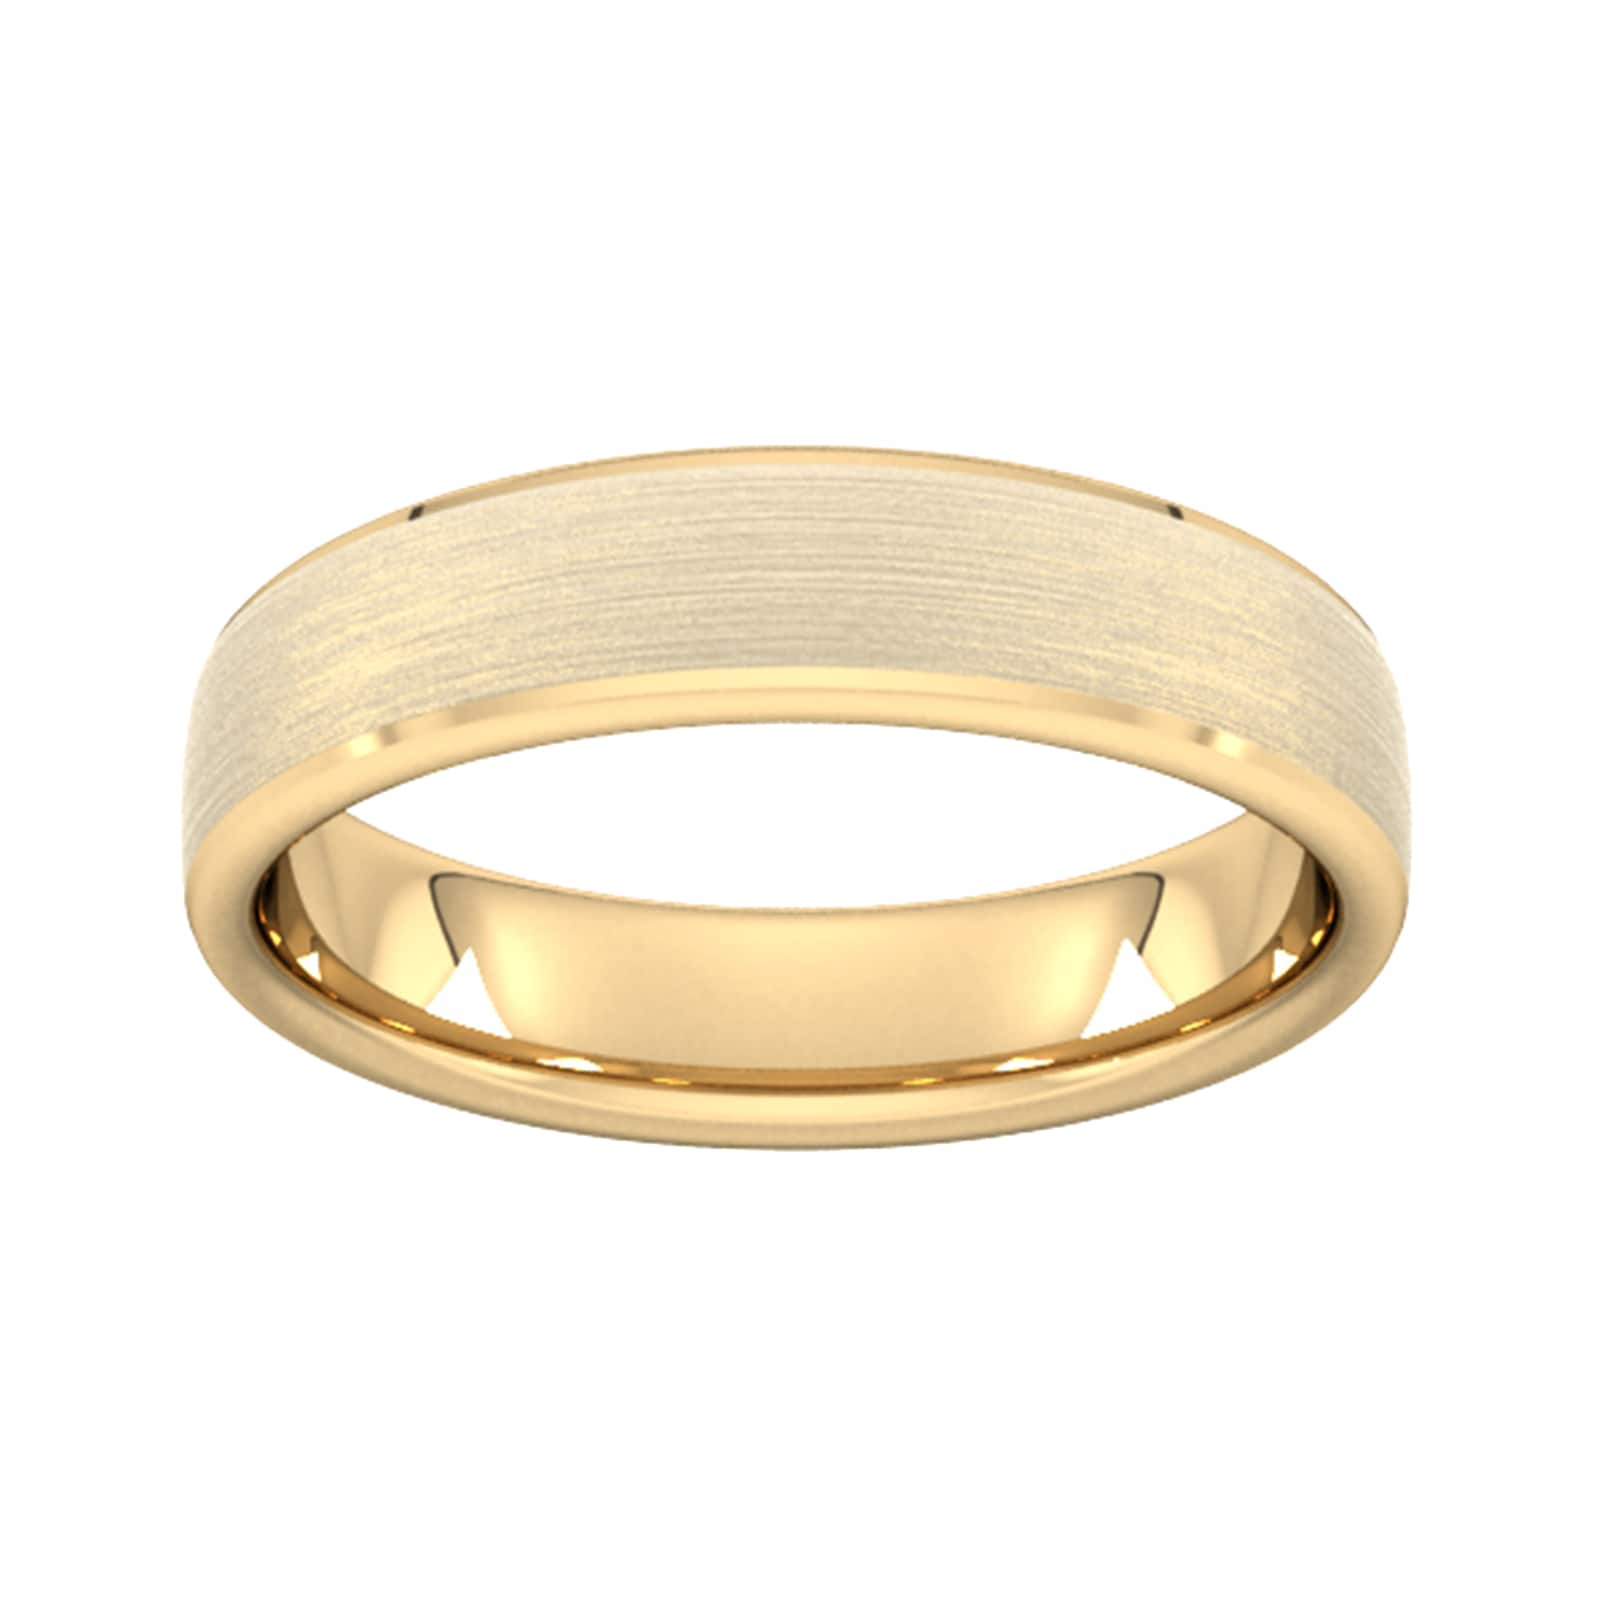 6mm traditional court standard polished chamfered edges with matt centre wedding ring in 9 carat yellow gold - ring size s